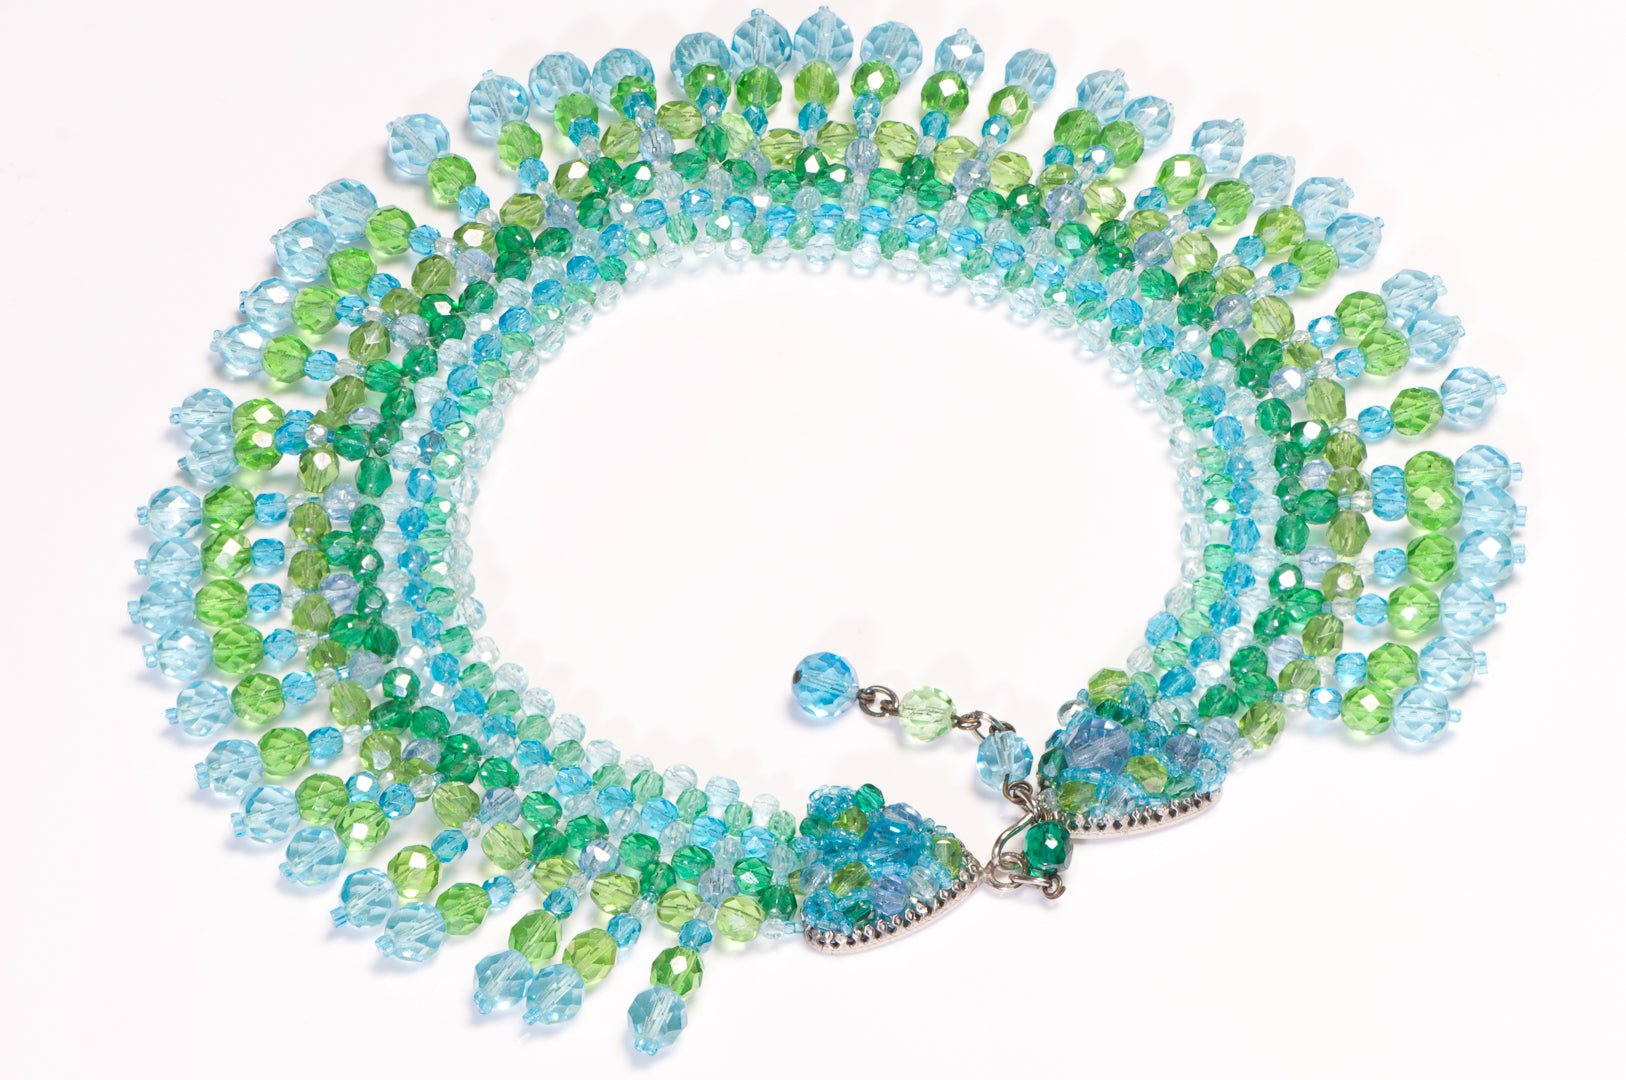 Coppola e Toppo 1960’s Emilio Pucci Green Blue Crystal Beads Collar Necklace - DSF Antique Jewelry